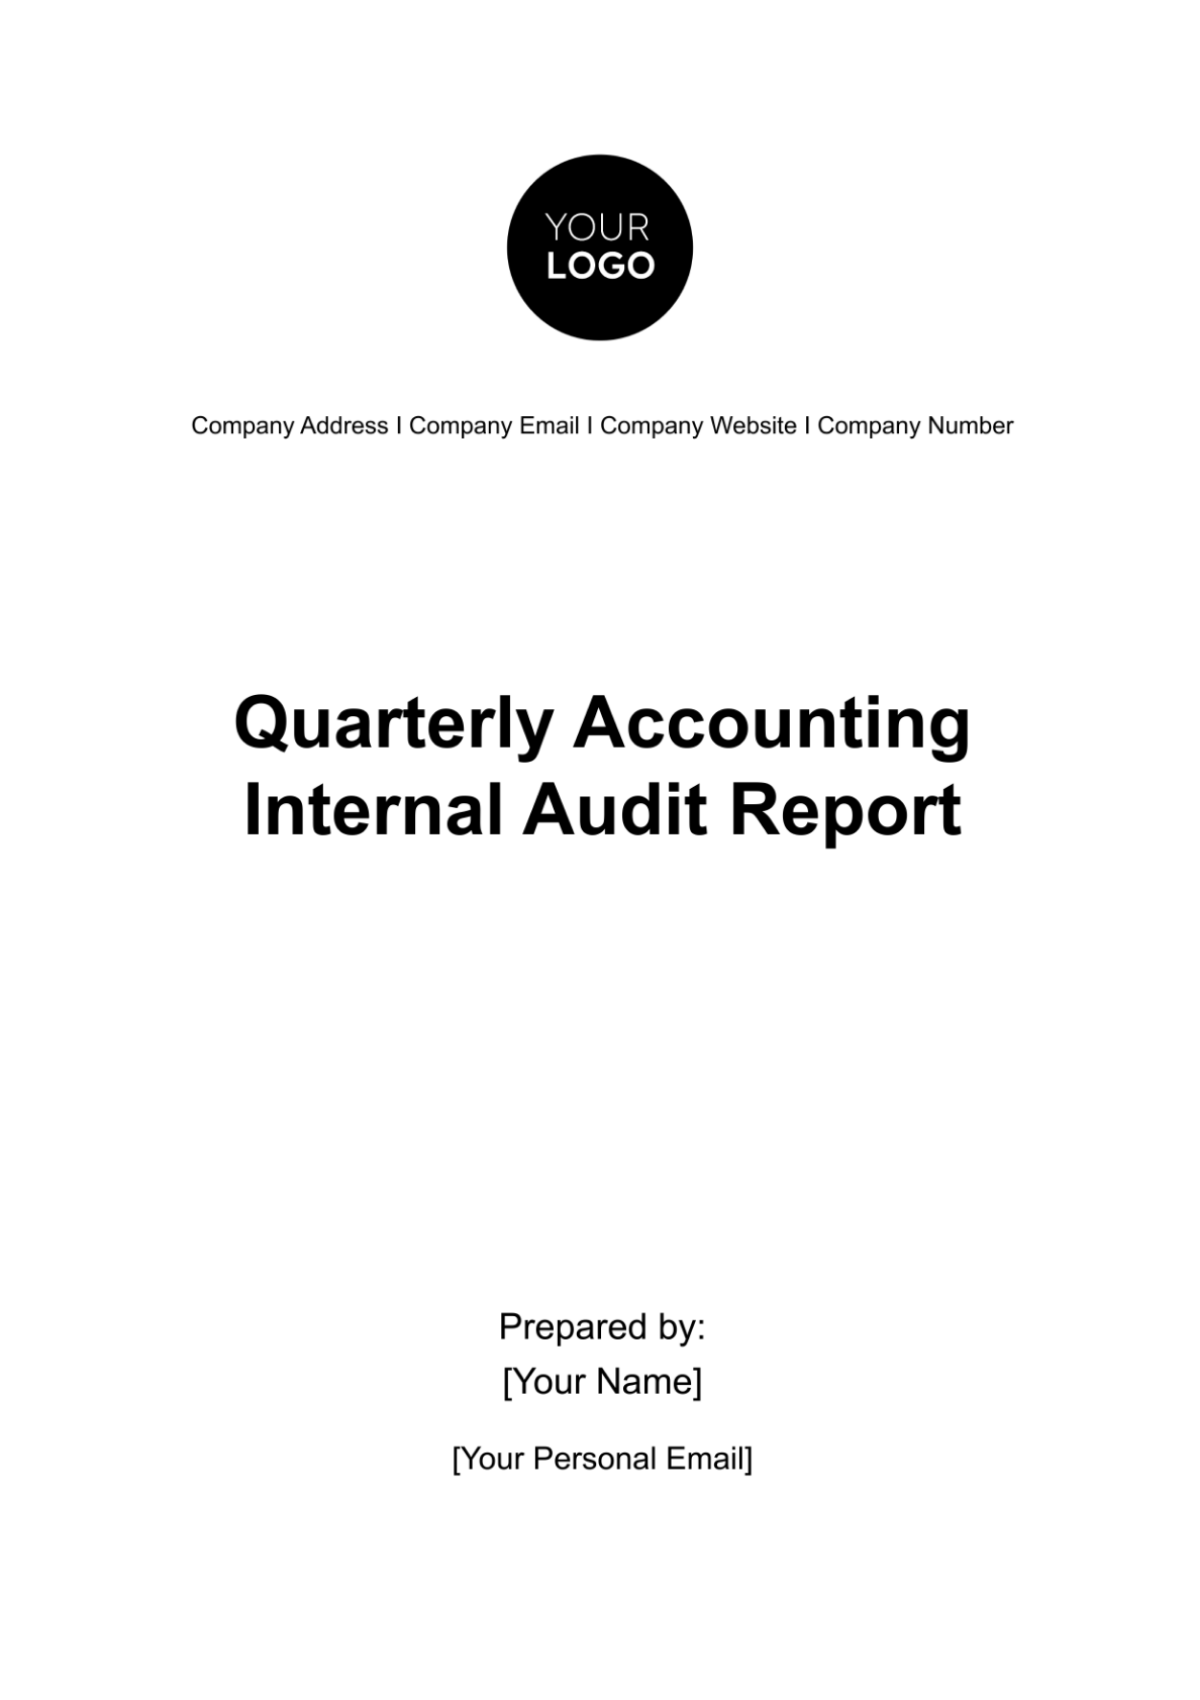 Quarterly Accounting Internal Audit Report Template